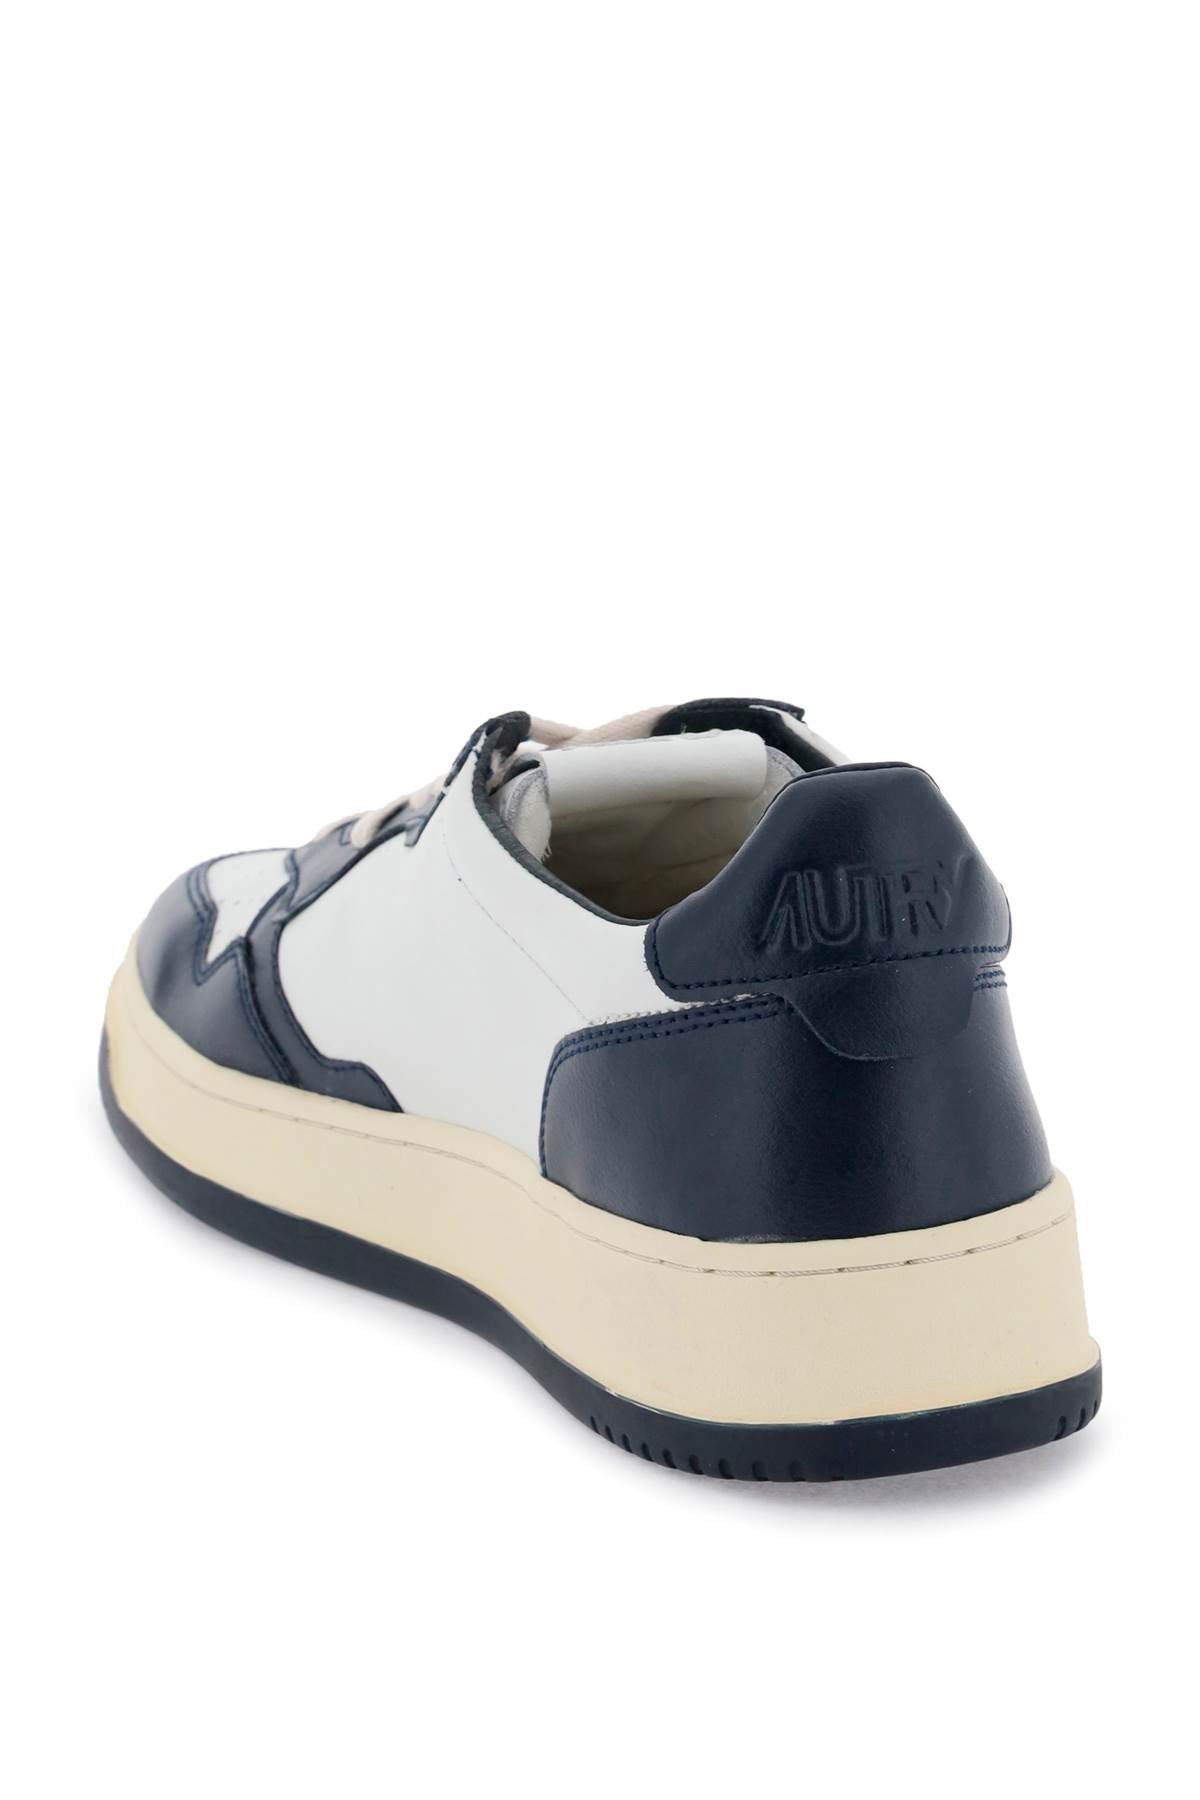 Autry Leather Medalist Low Sneakers   White